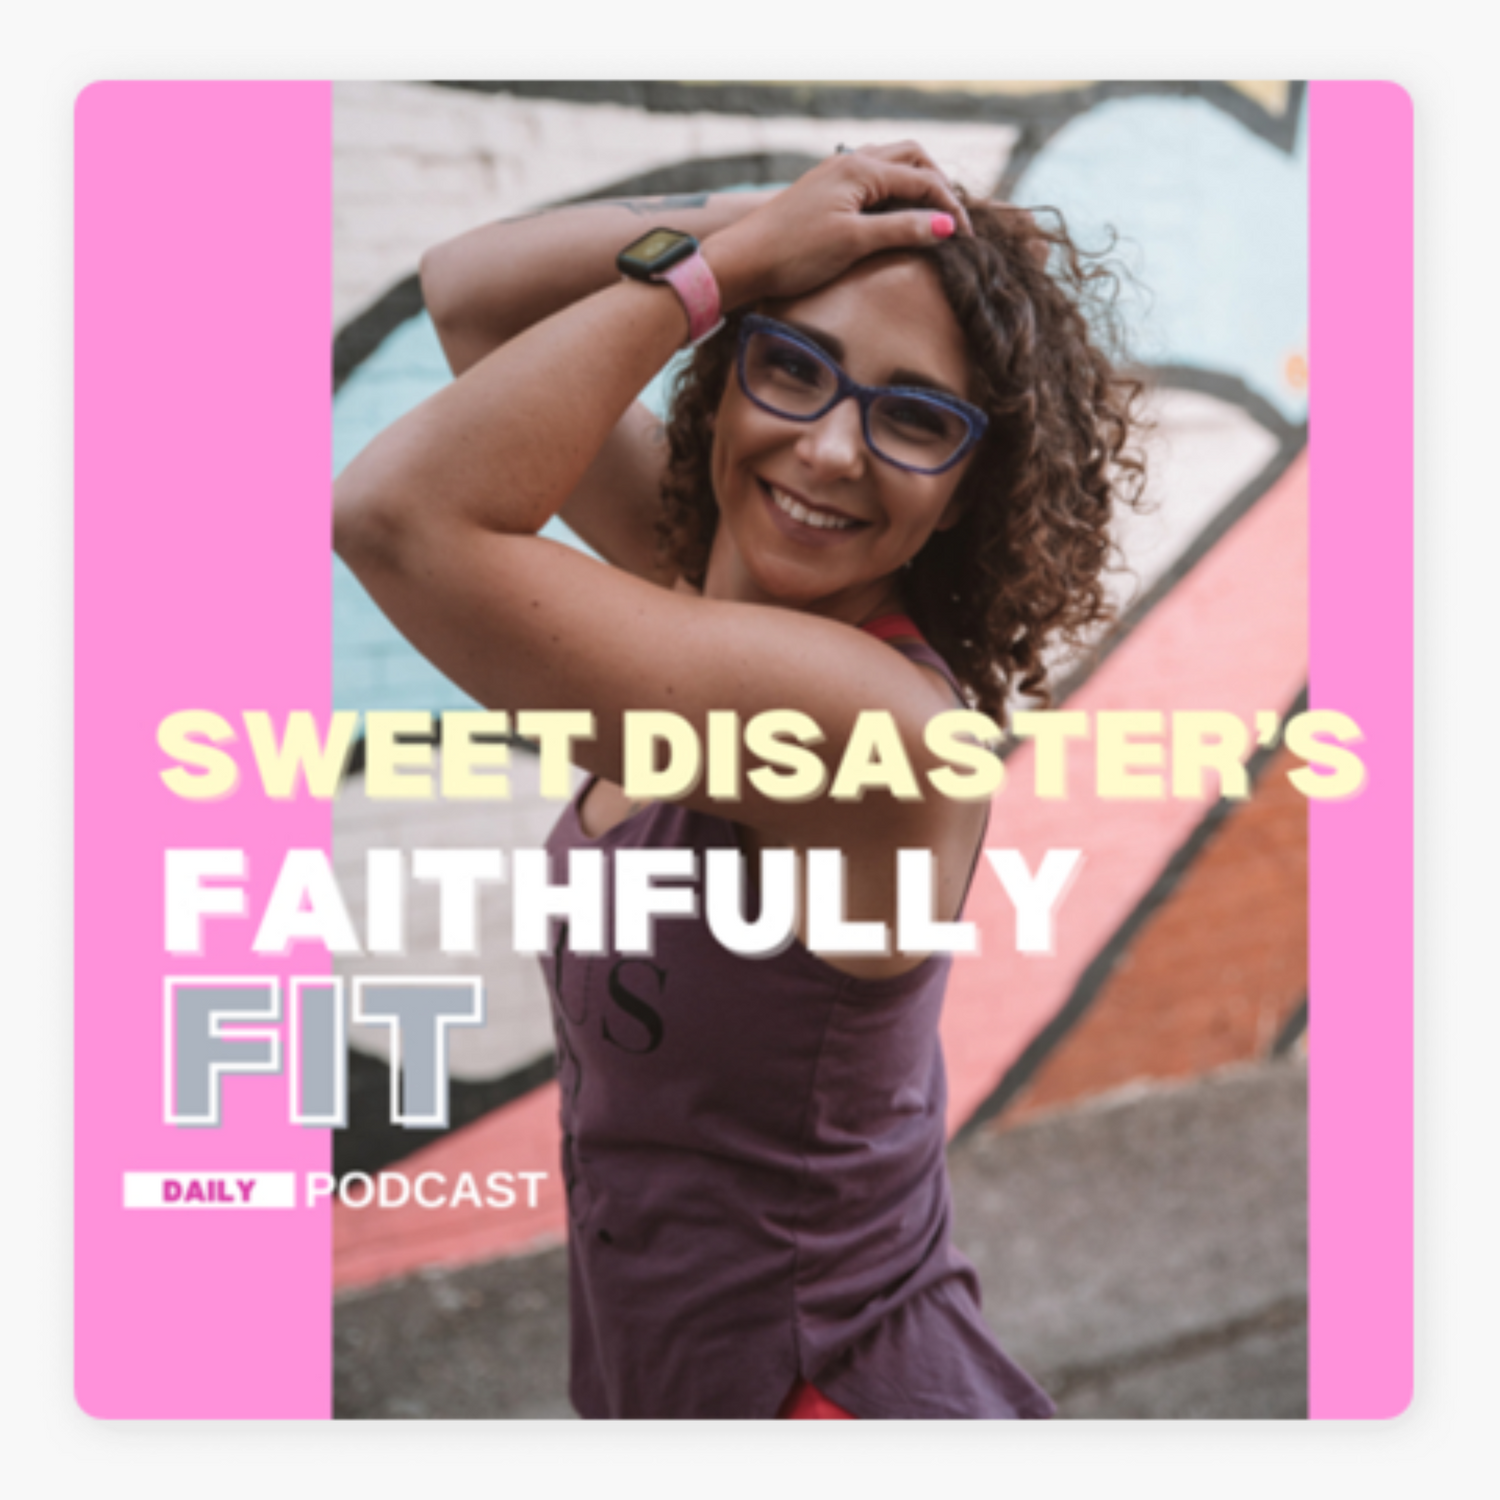 Stephanie Polcyn's podcast "Sweet Disaster's Faithfully Fit" featured Lindsay Dain and their self publishing journeys with Kindle Direct Publishing